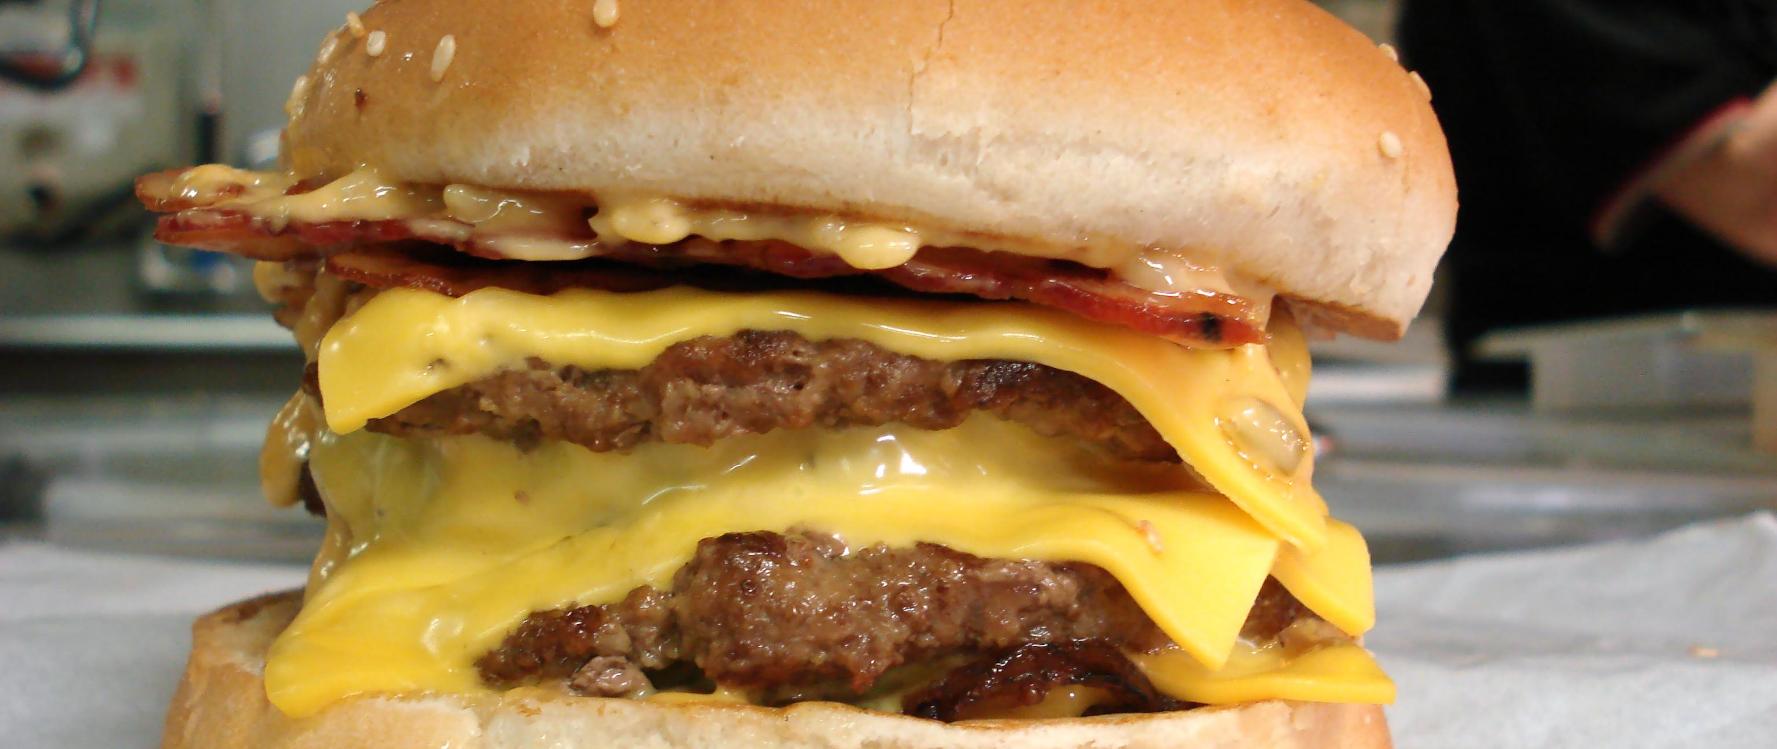 Unhealthy processed cheese burger